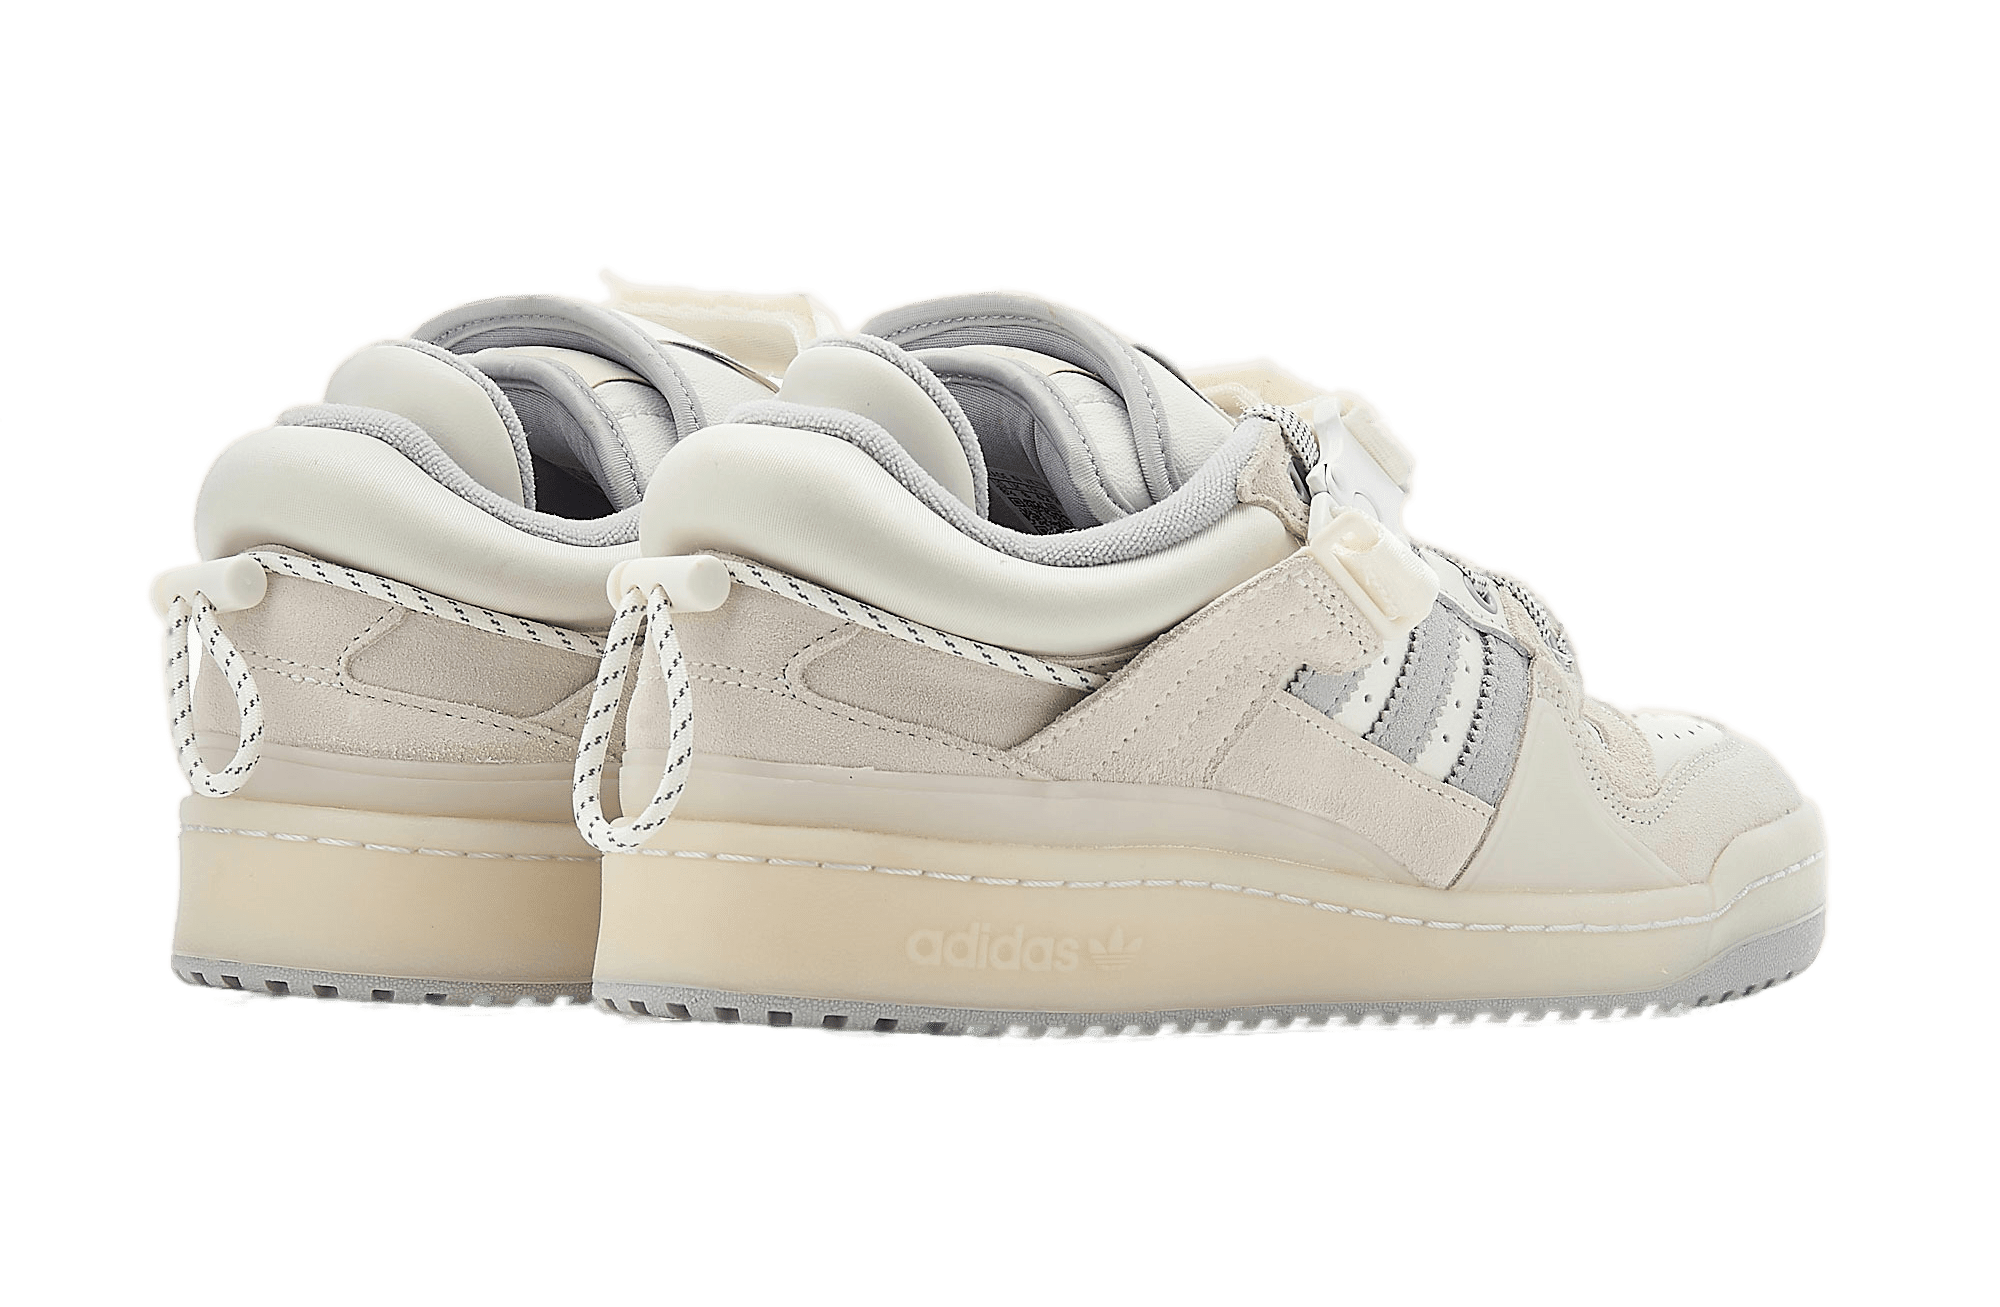 Adidas Forum x Low Bad SneakCenter Bunny – White Cloud